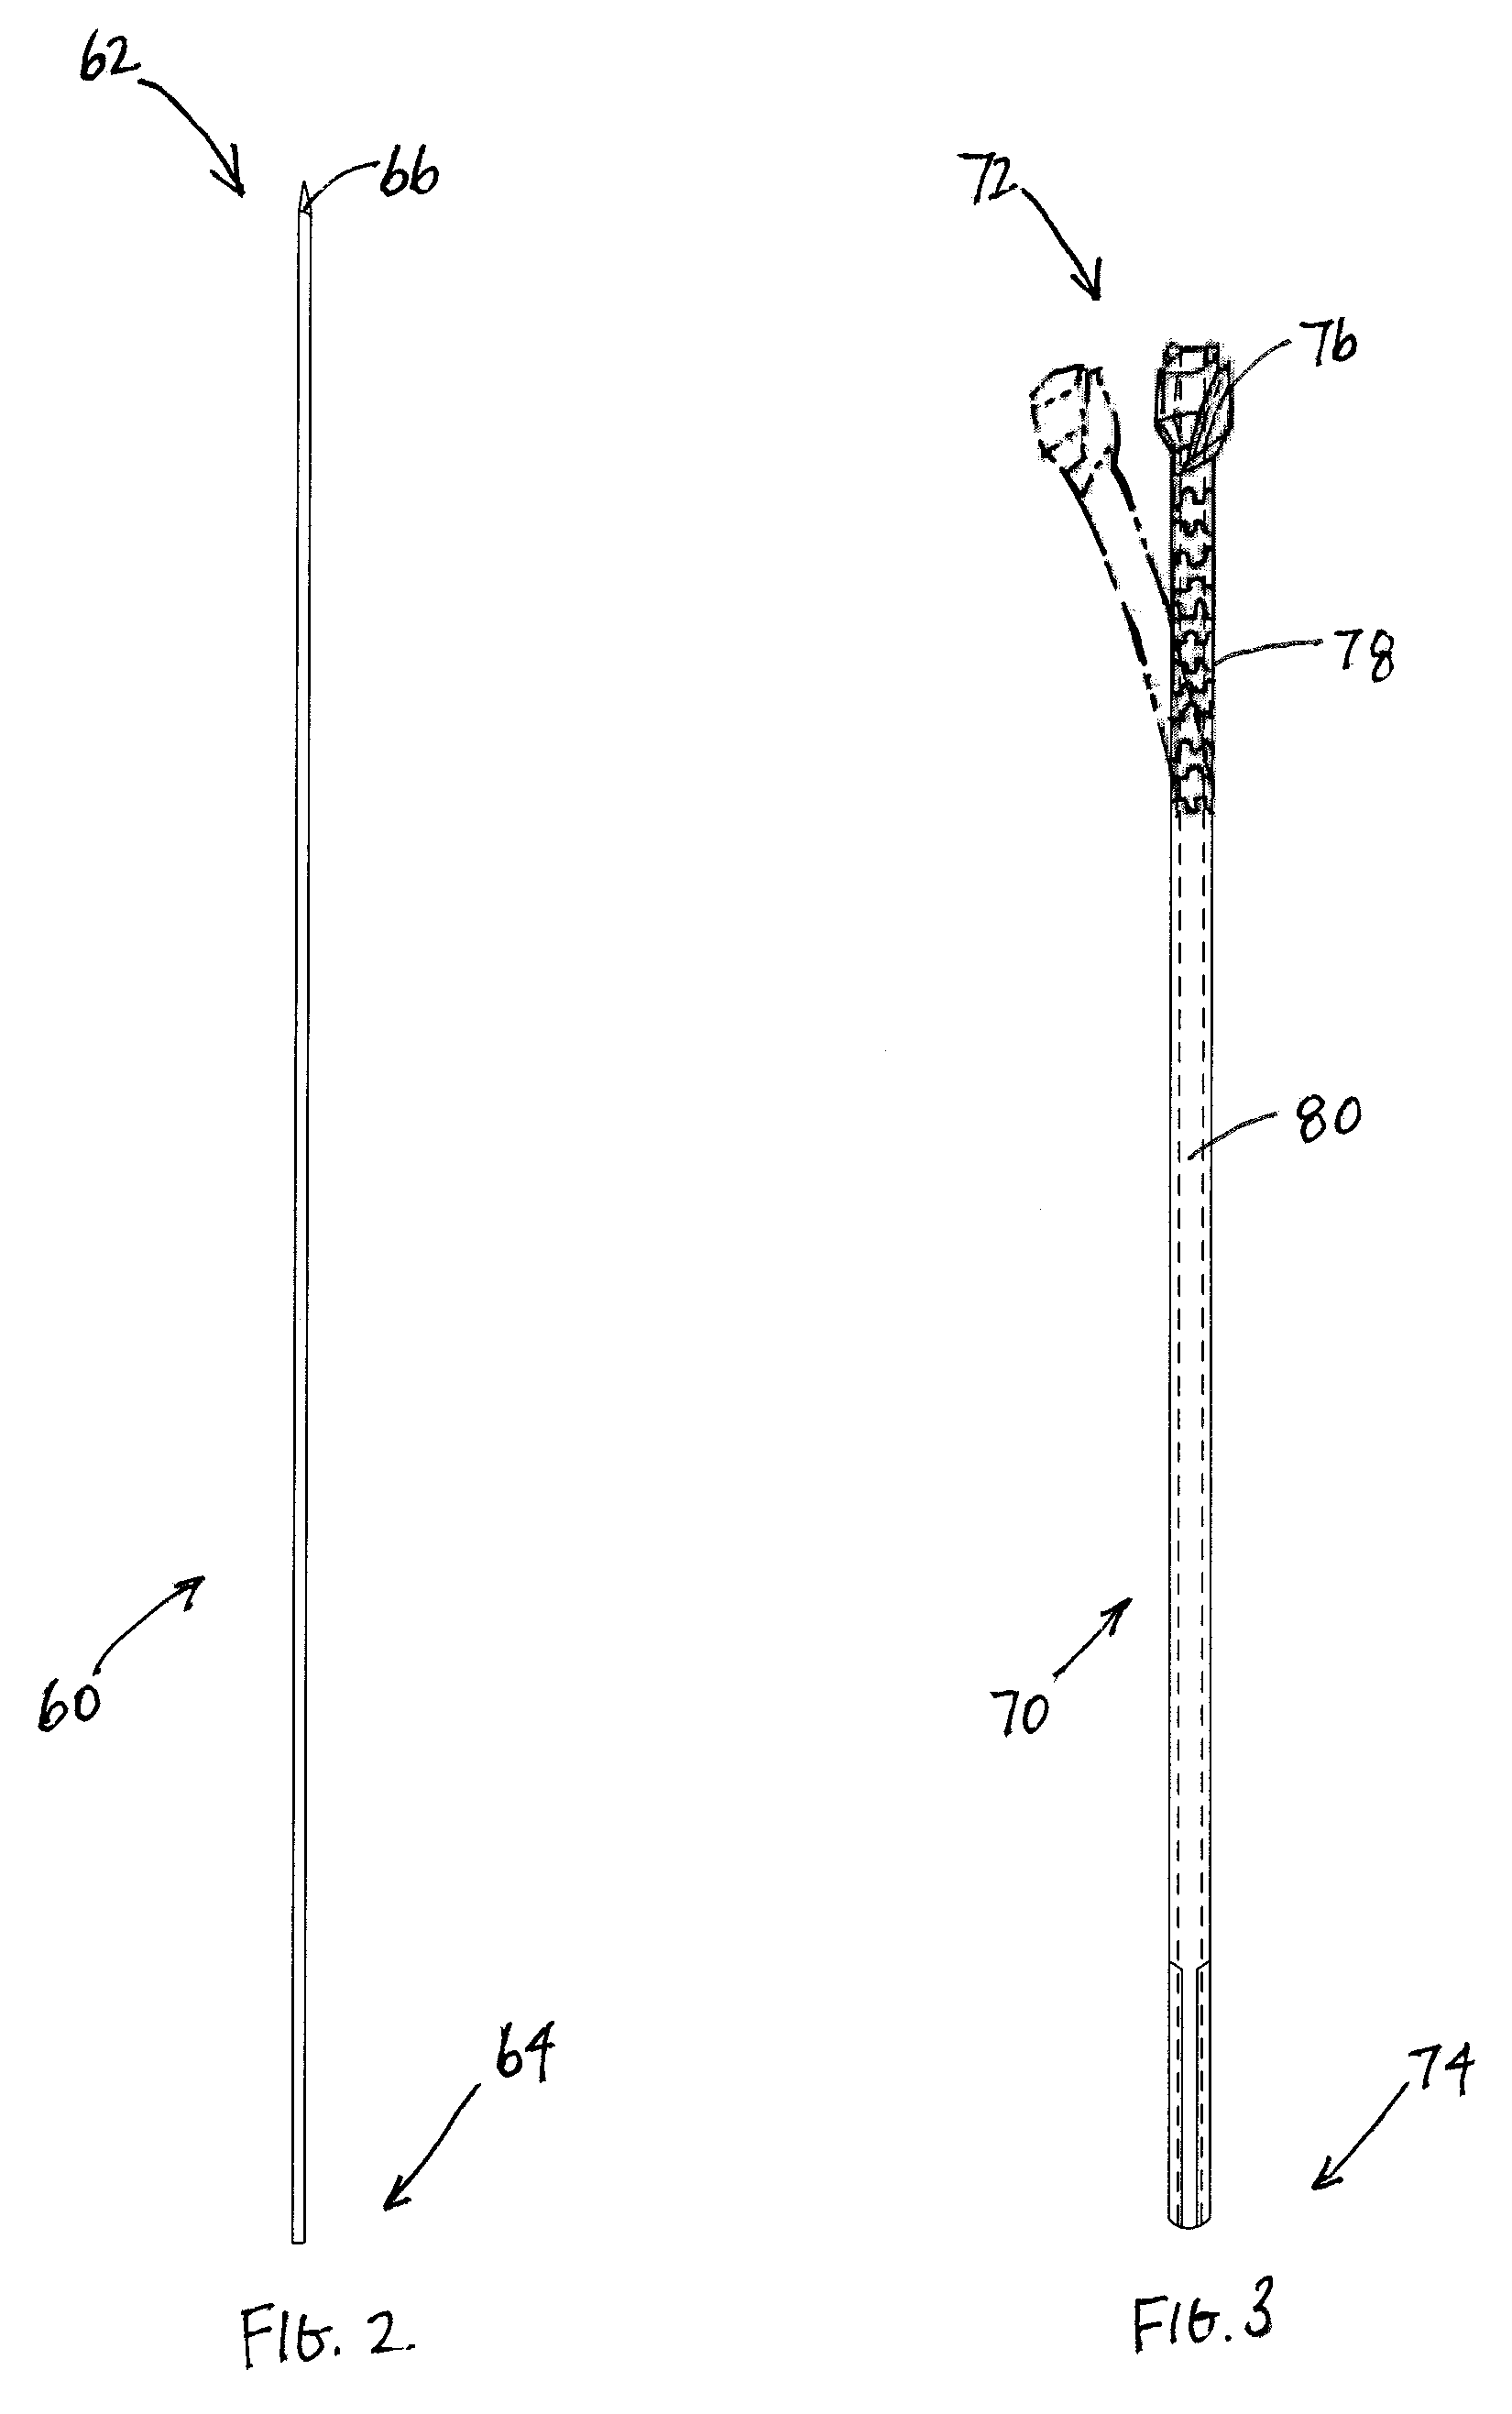 Surgical Drill For Providing Holes At An Angle